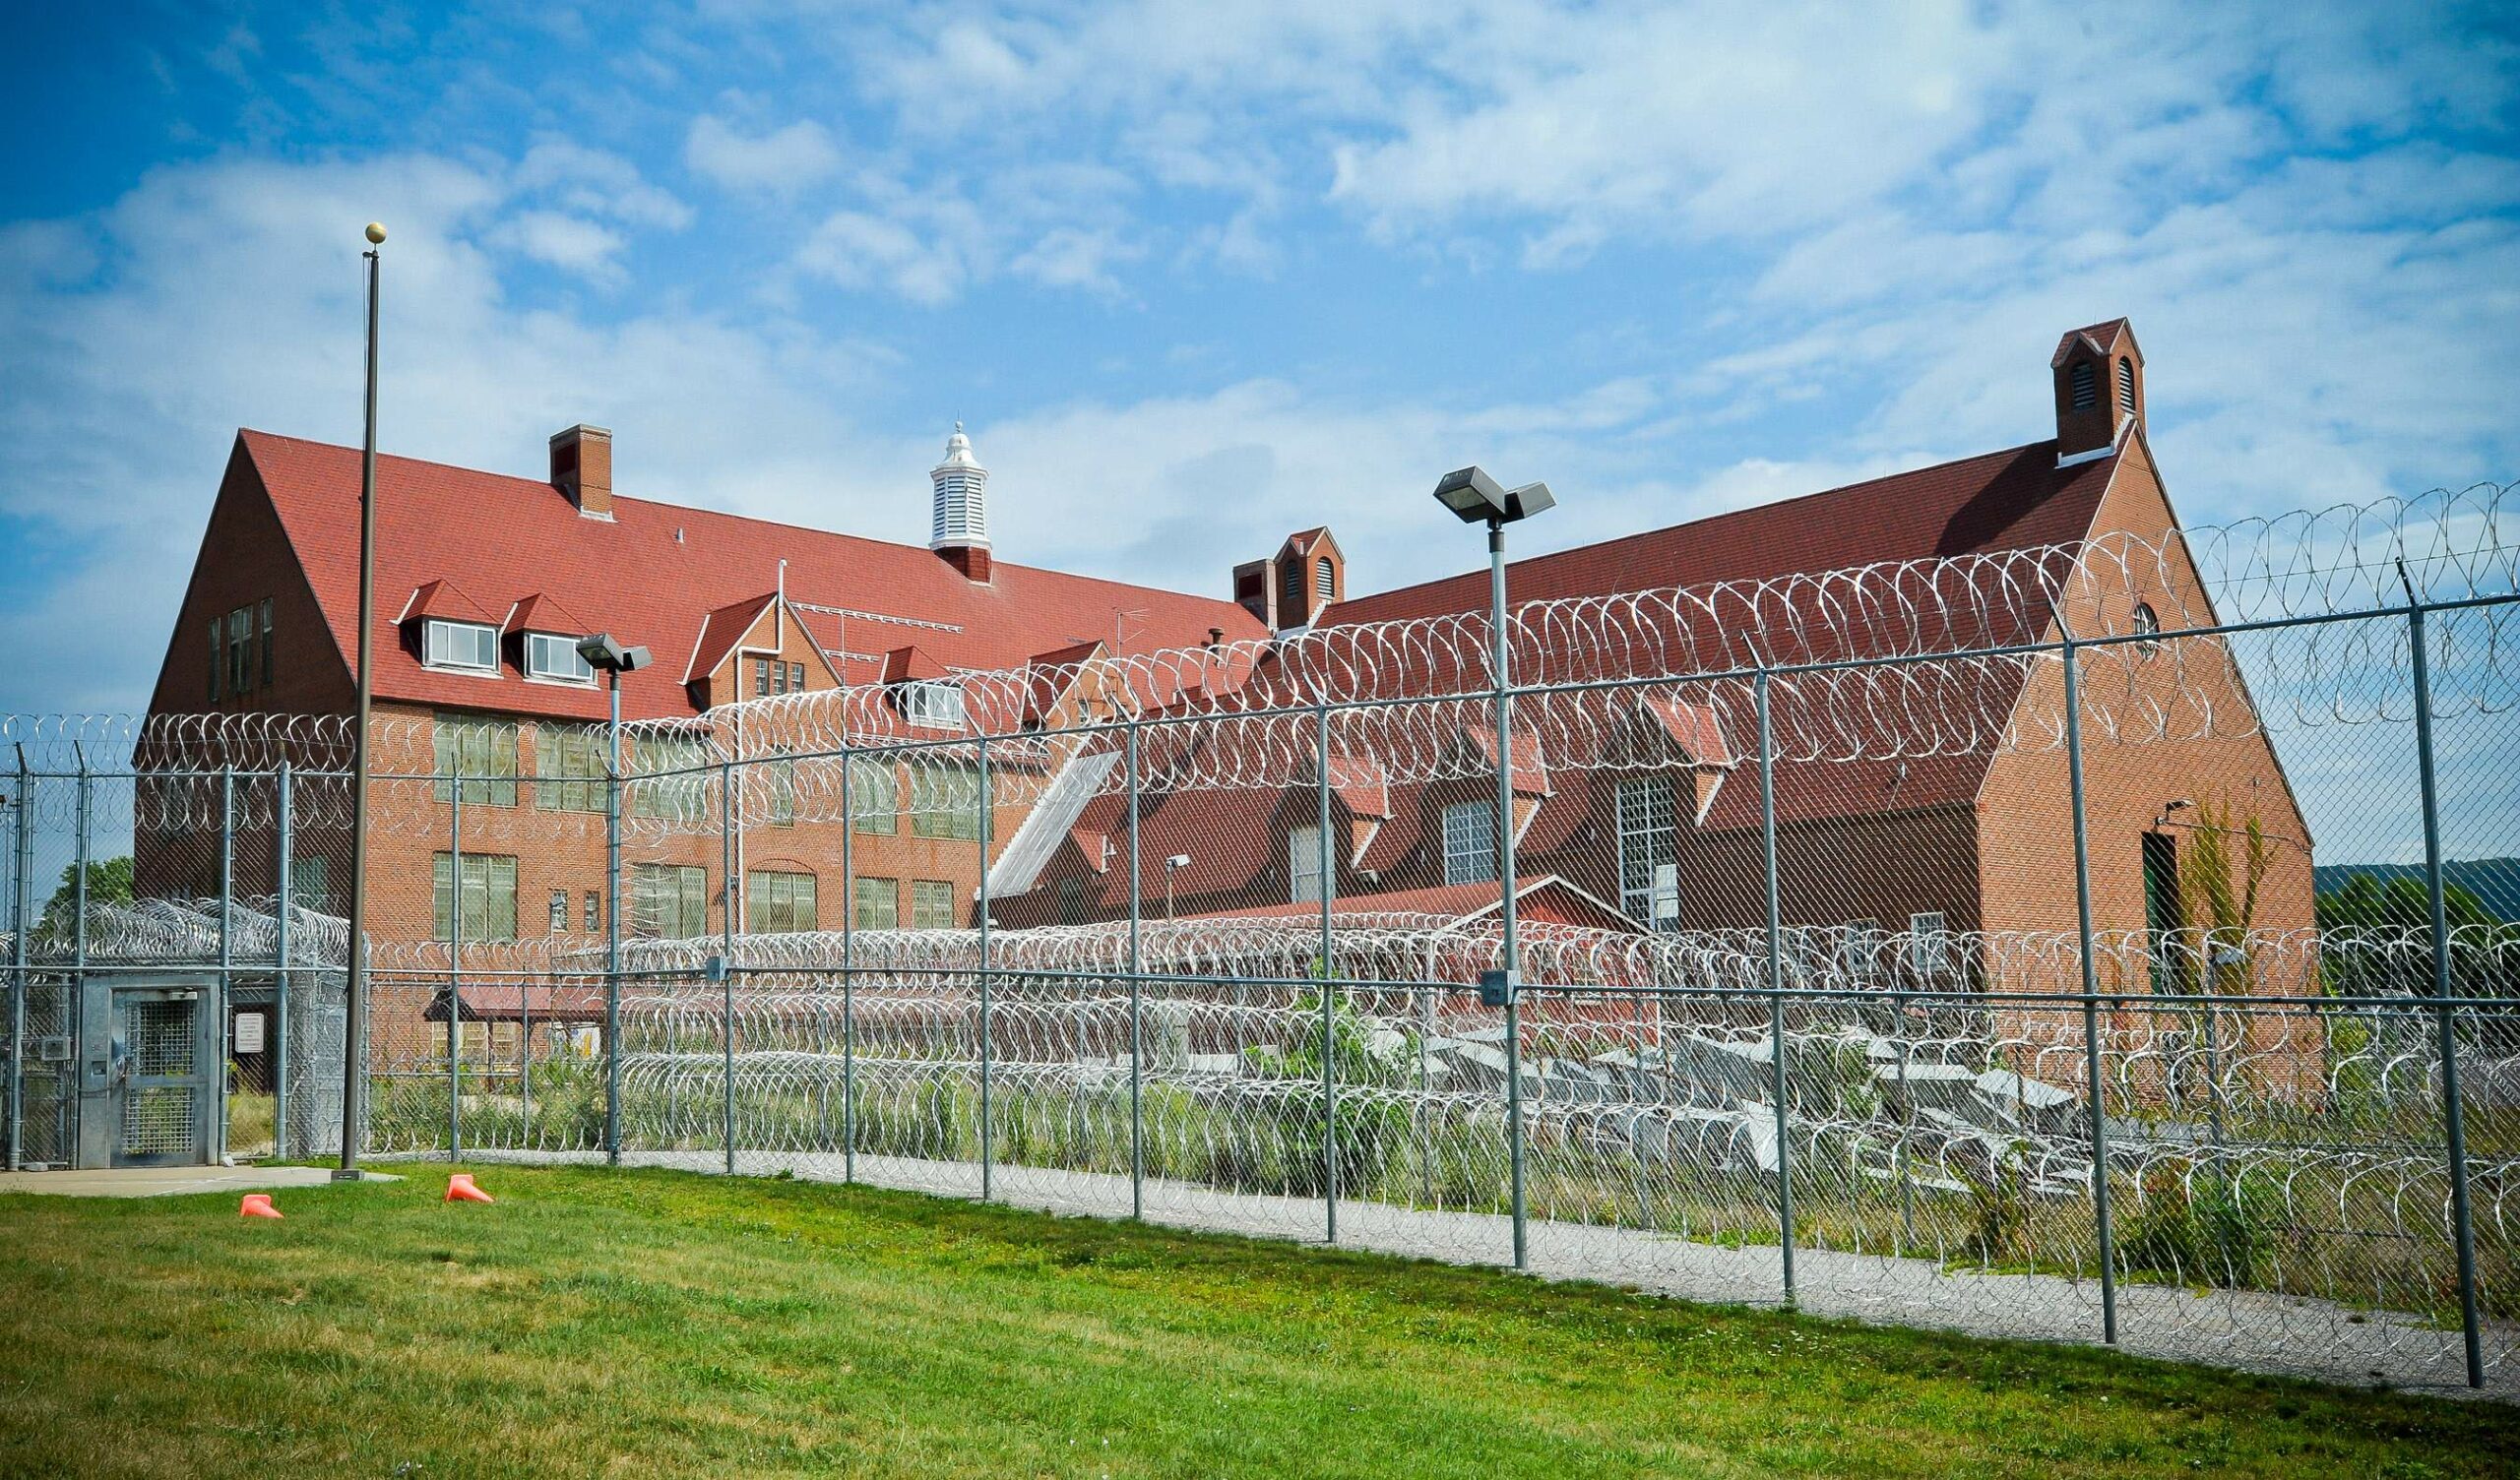 New York Prison Is About to Become Massive Corporate Weed Complex